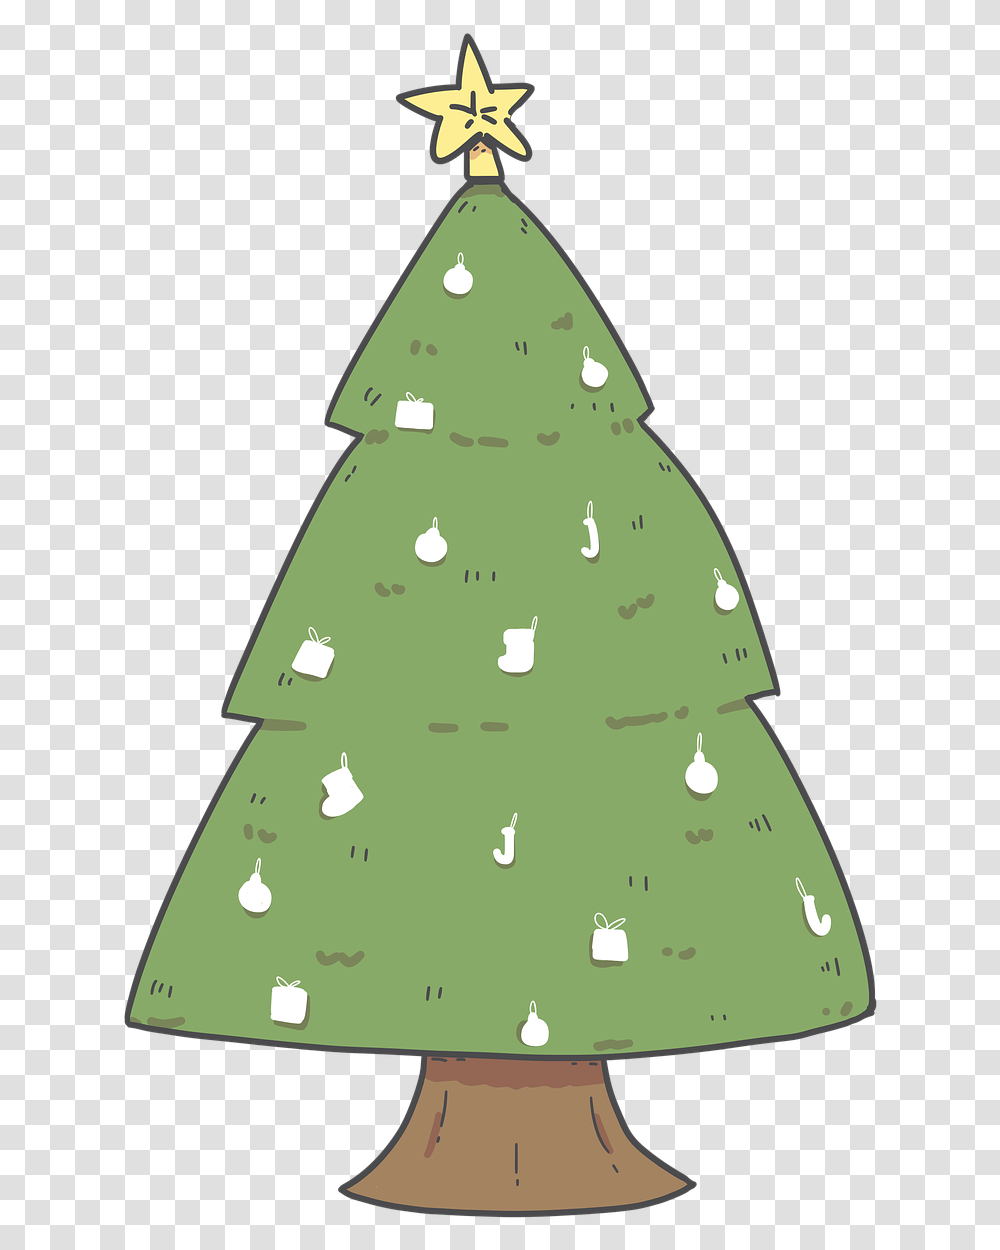 Winter Tree Snow Free Image On Pixabay Christmas Tree, Plant, Triangle, Ornament, Cone Transparent Png